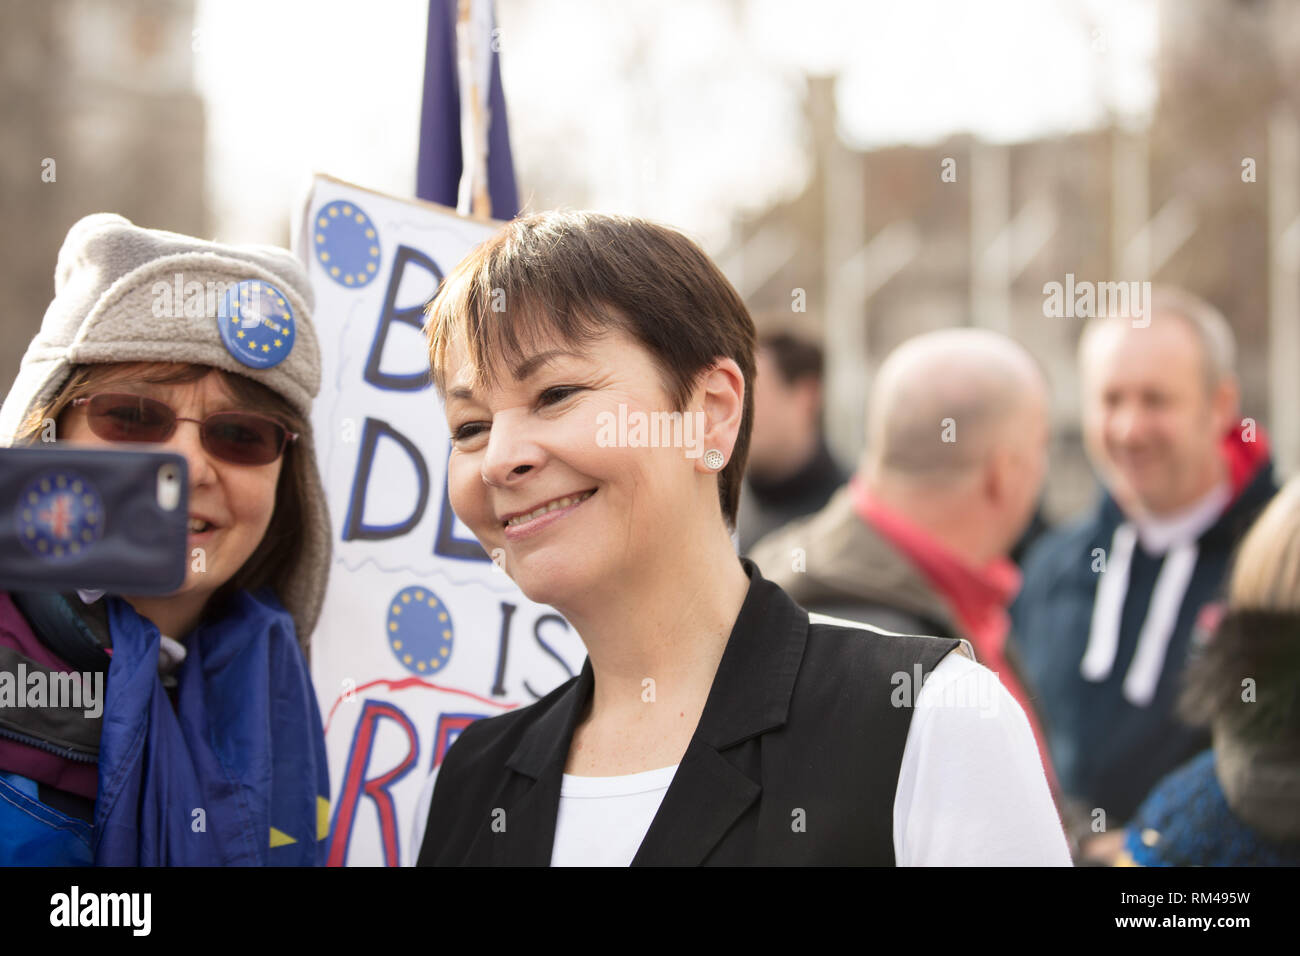 London, UK. 13th February 2019. Remainer takes a picture with her mobile phone together with Caroline Green, MP, on Parliament Square, London UK, today. Credit: Joe Kuis /Alamy Live News Stock Photo